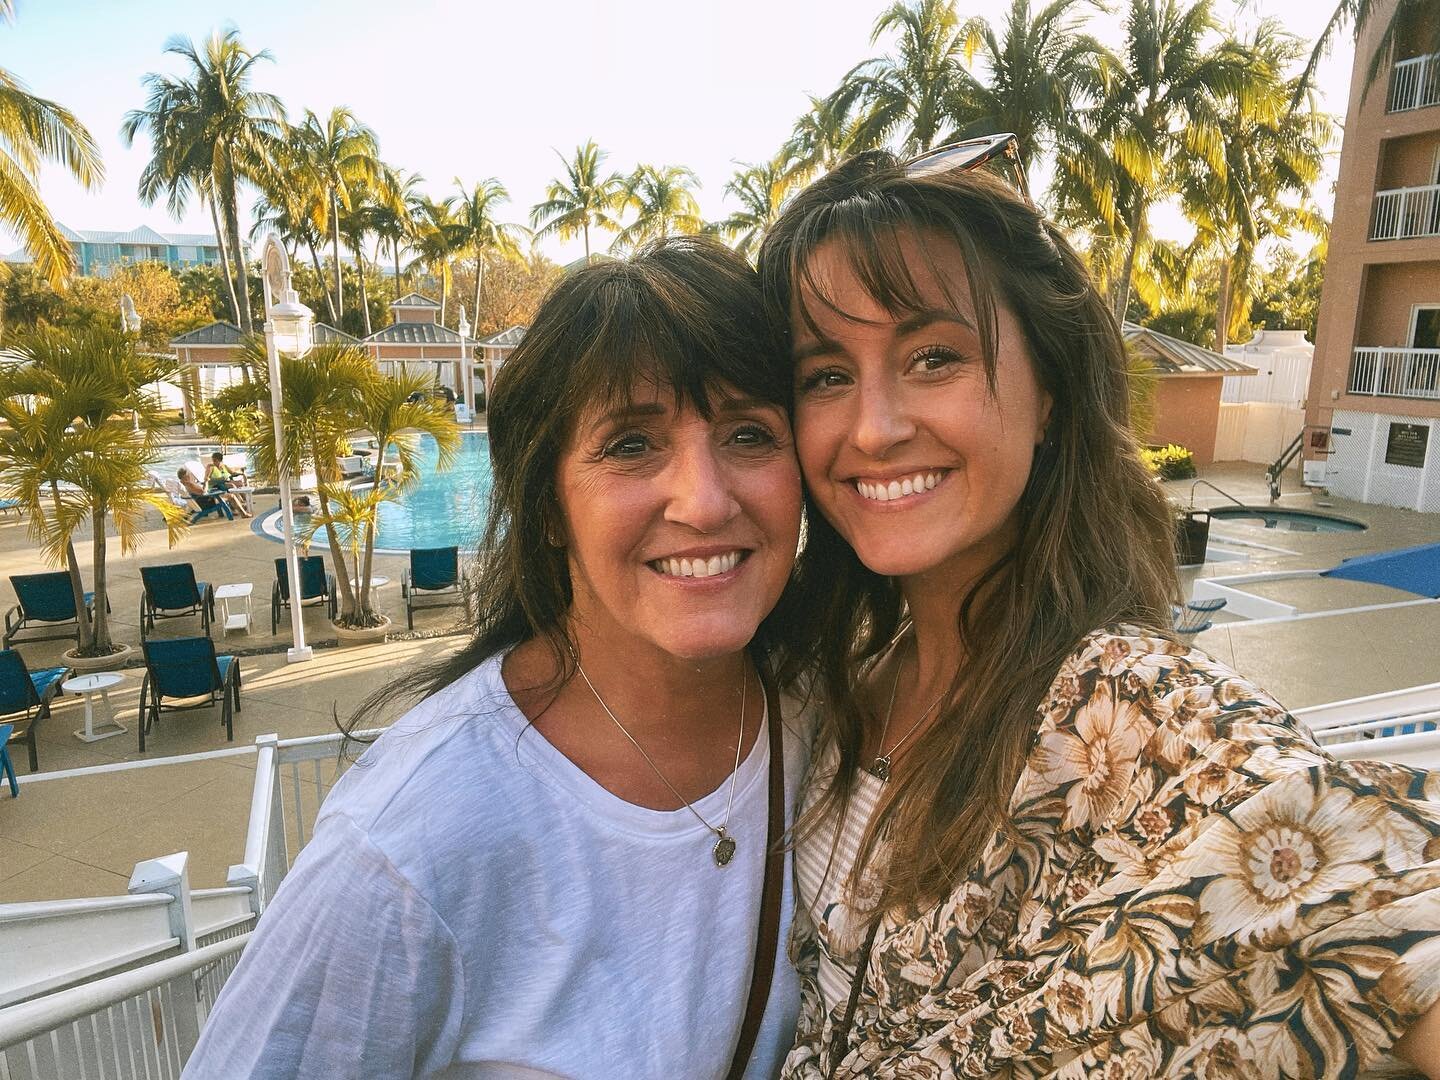 Some much needed time off with my Mama🌴We drove down to the Florida Keys and stayed for a few nights, just the two of us. So happy she could come visit.❤️❤️❤️
.
.
.
.
.
#gotitfrommymama #keywest #southflorida